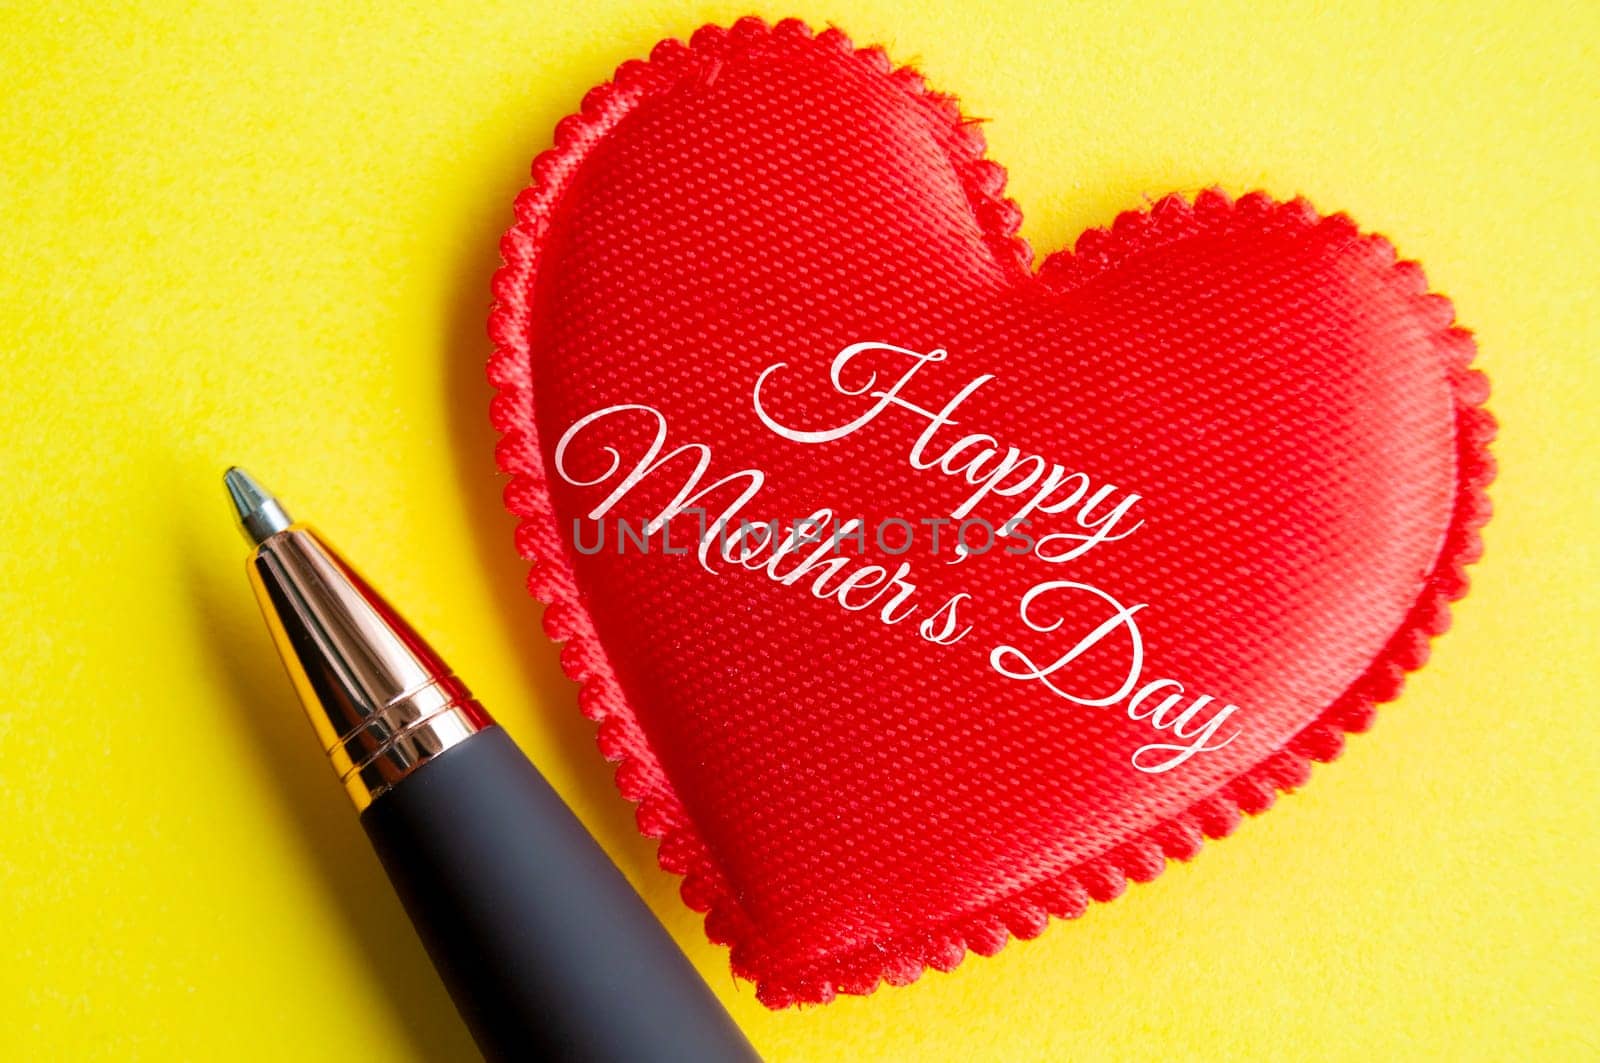 Top view of happy mother's day on red heart shape on yellow background. Happy Mother's Day Concept.